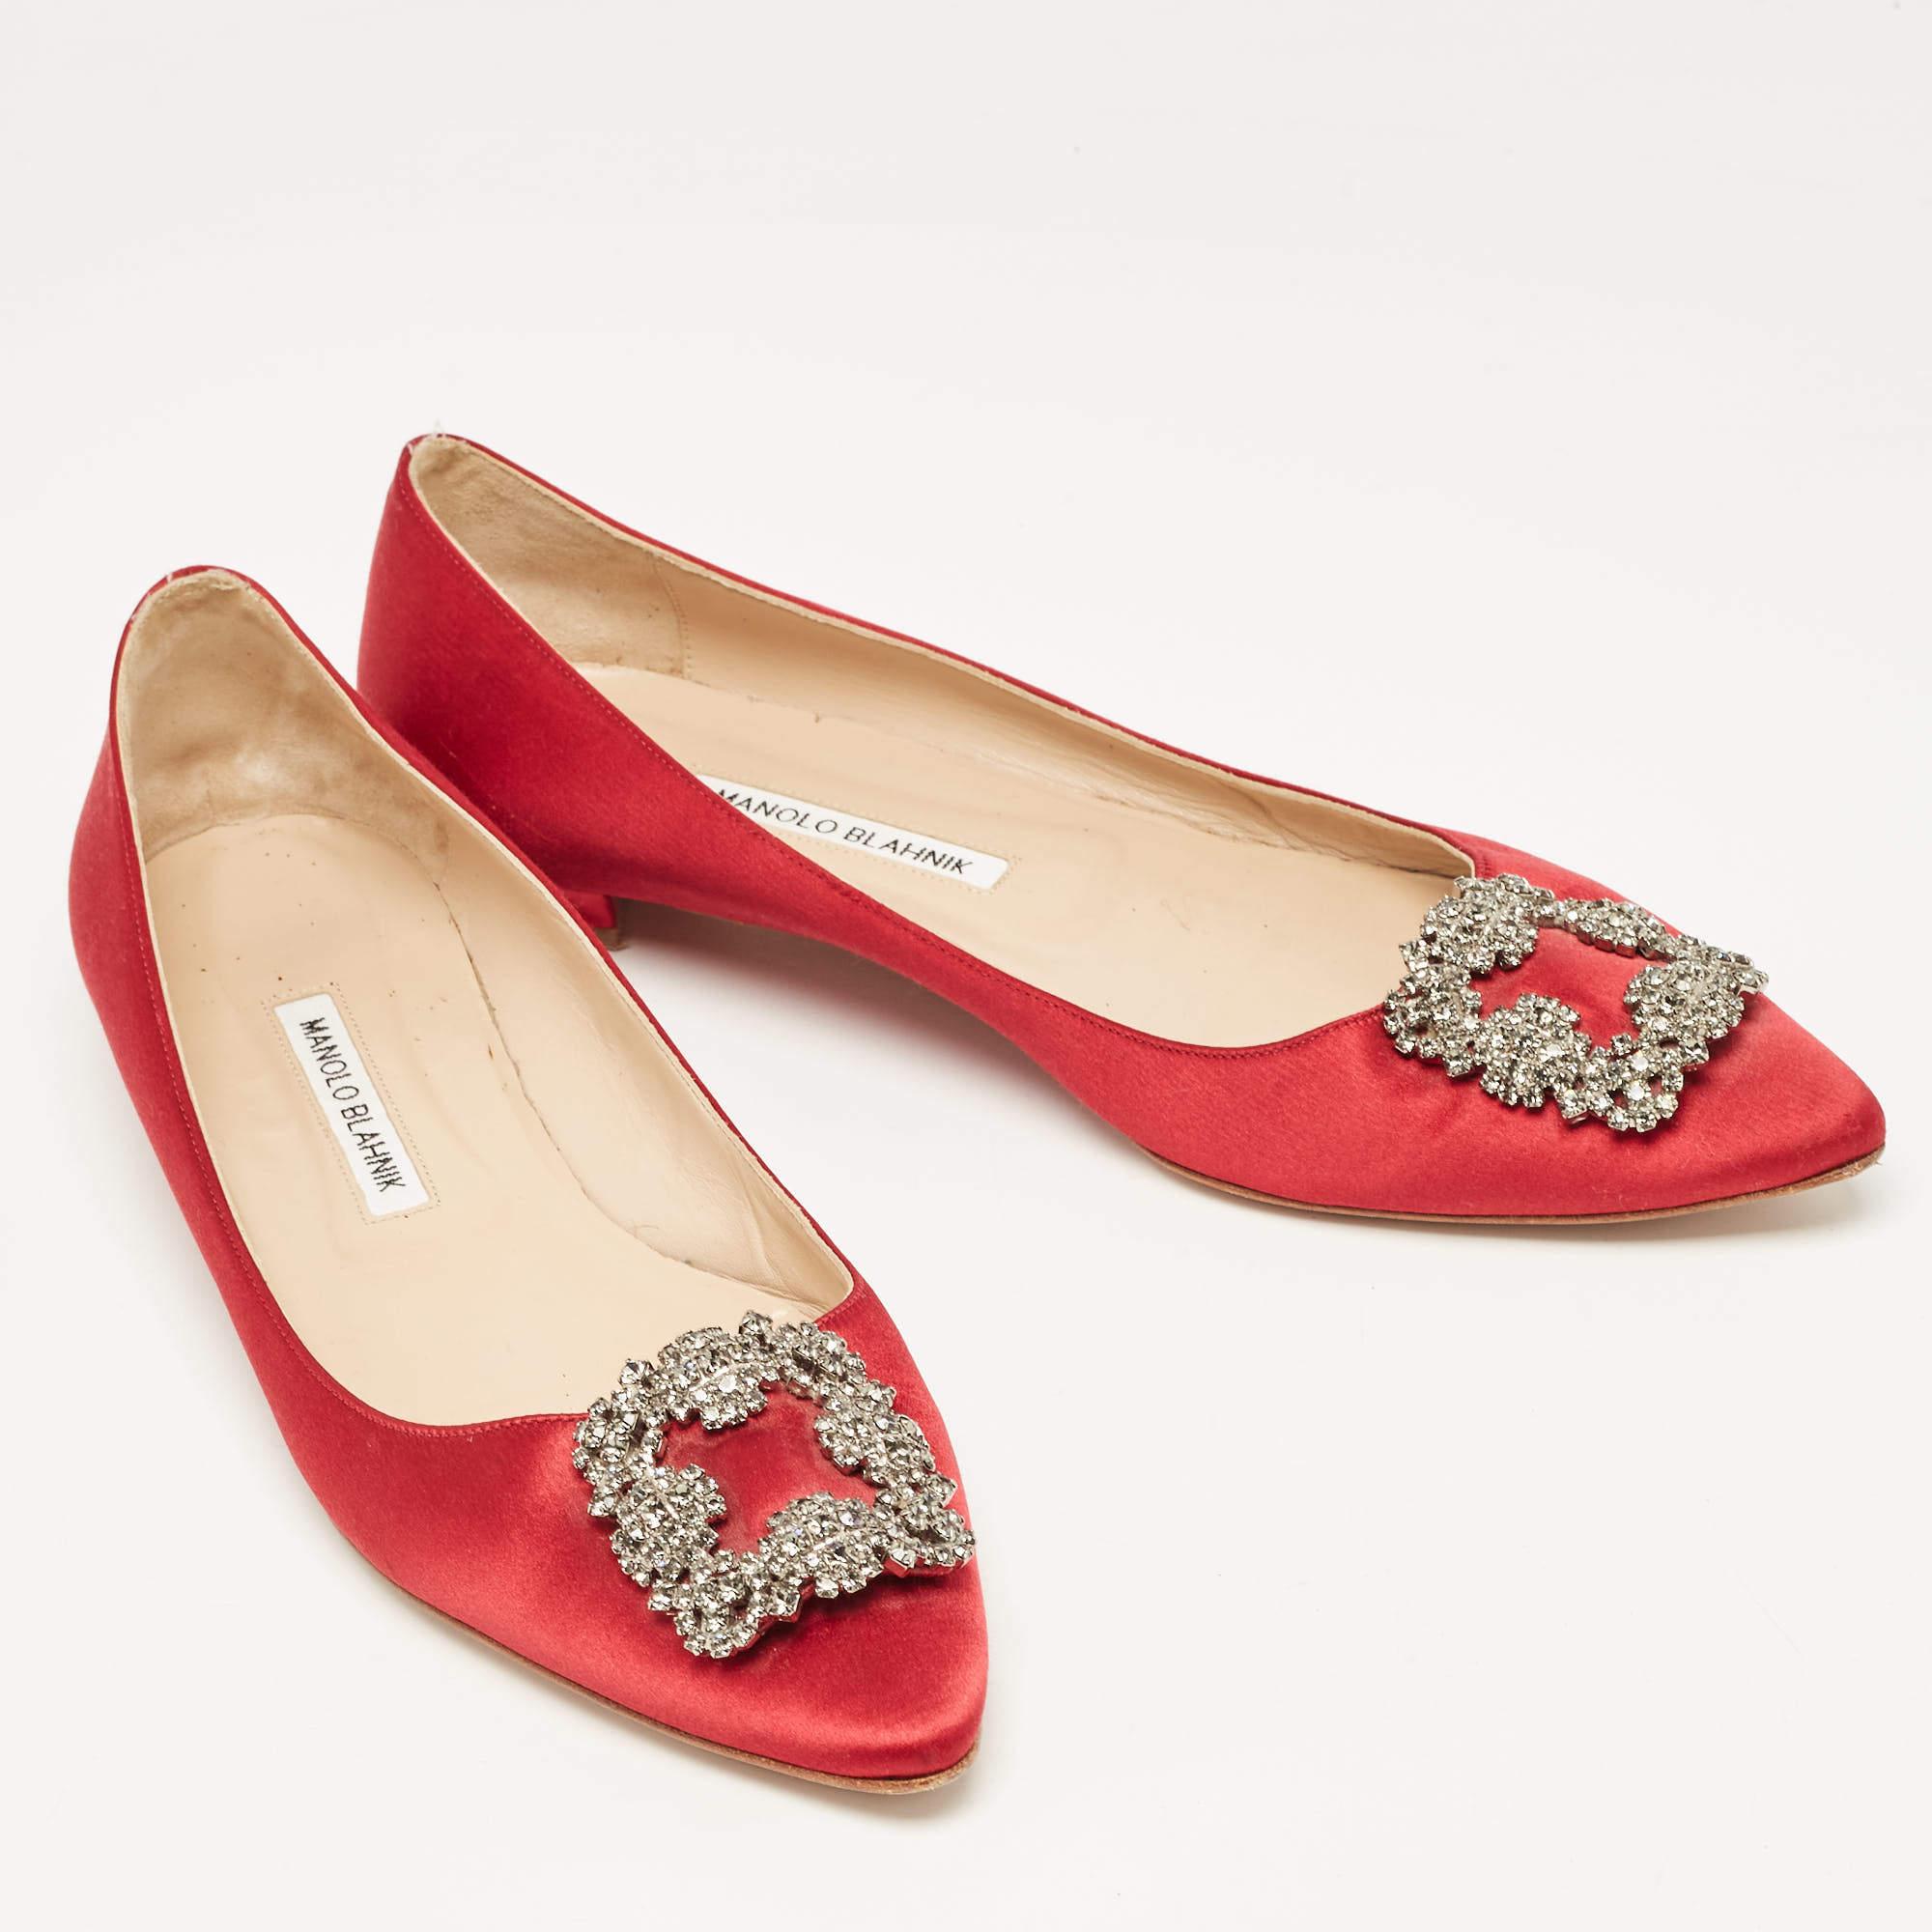 These iconic ballet flats are by Manolo Blahnik. Styled in a burgundy hue, with dazzling embellishments on the toes and leather insoles to provide comfort, these luxurious satin pumps will never fail to lift your outfits.

